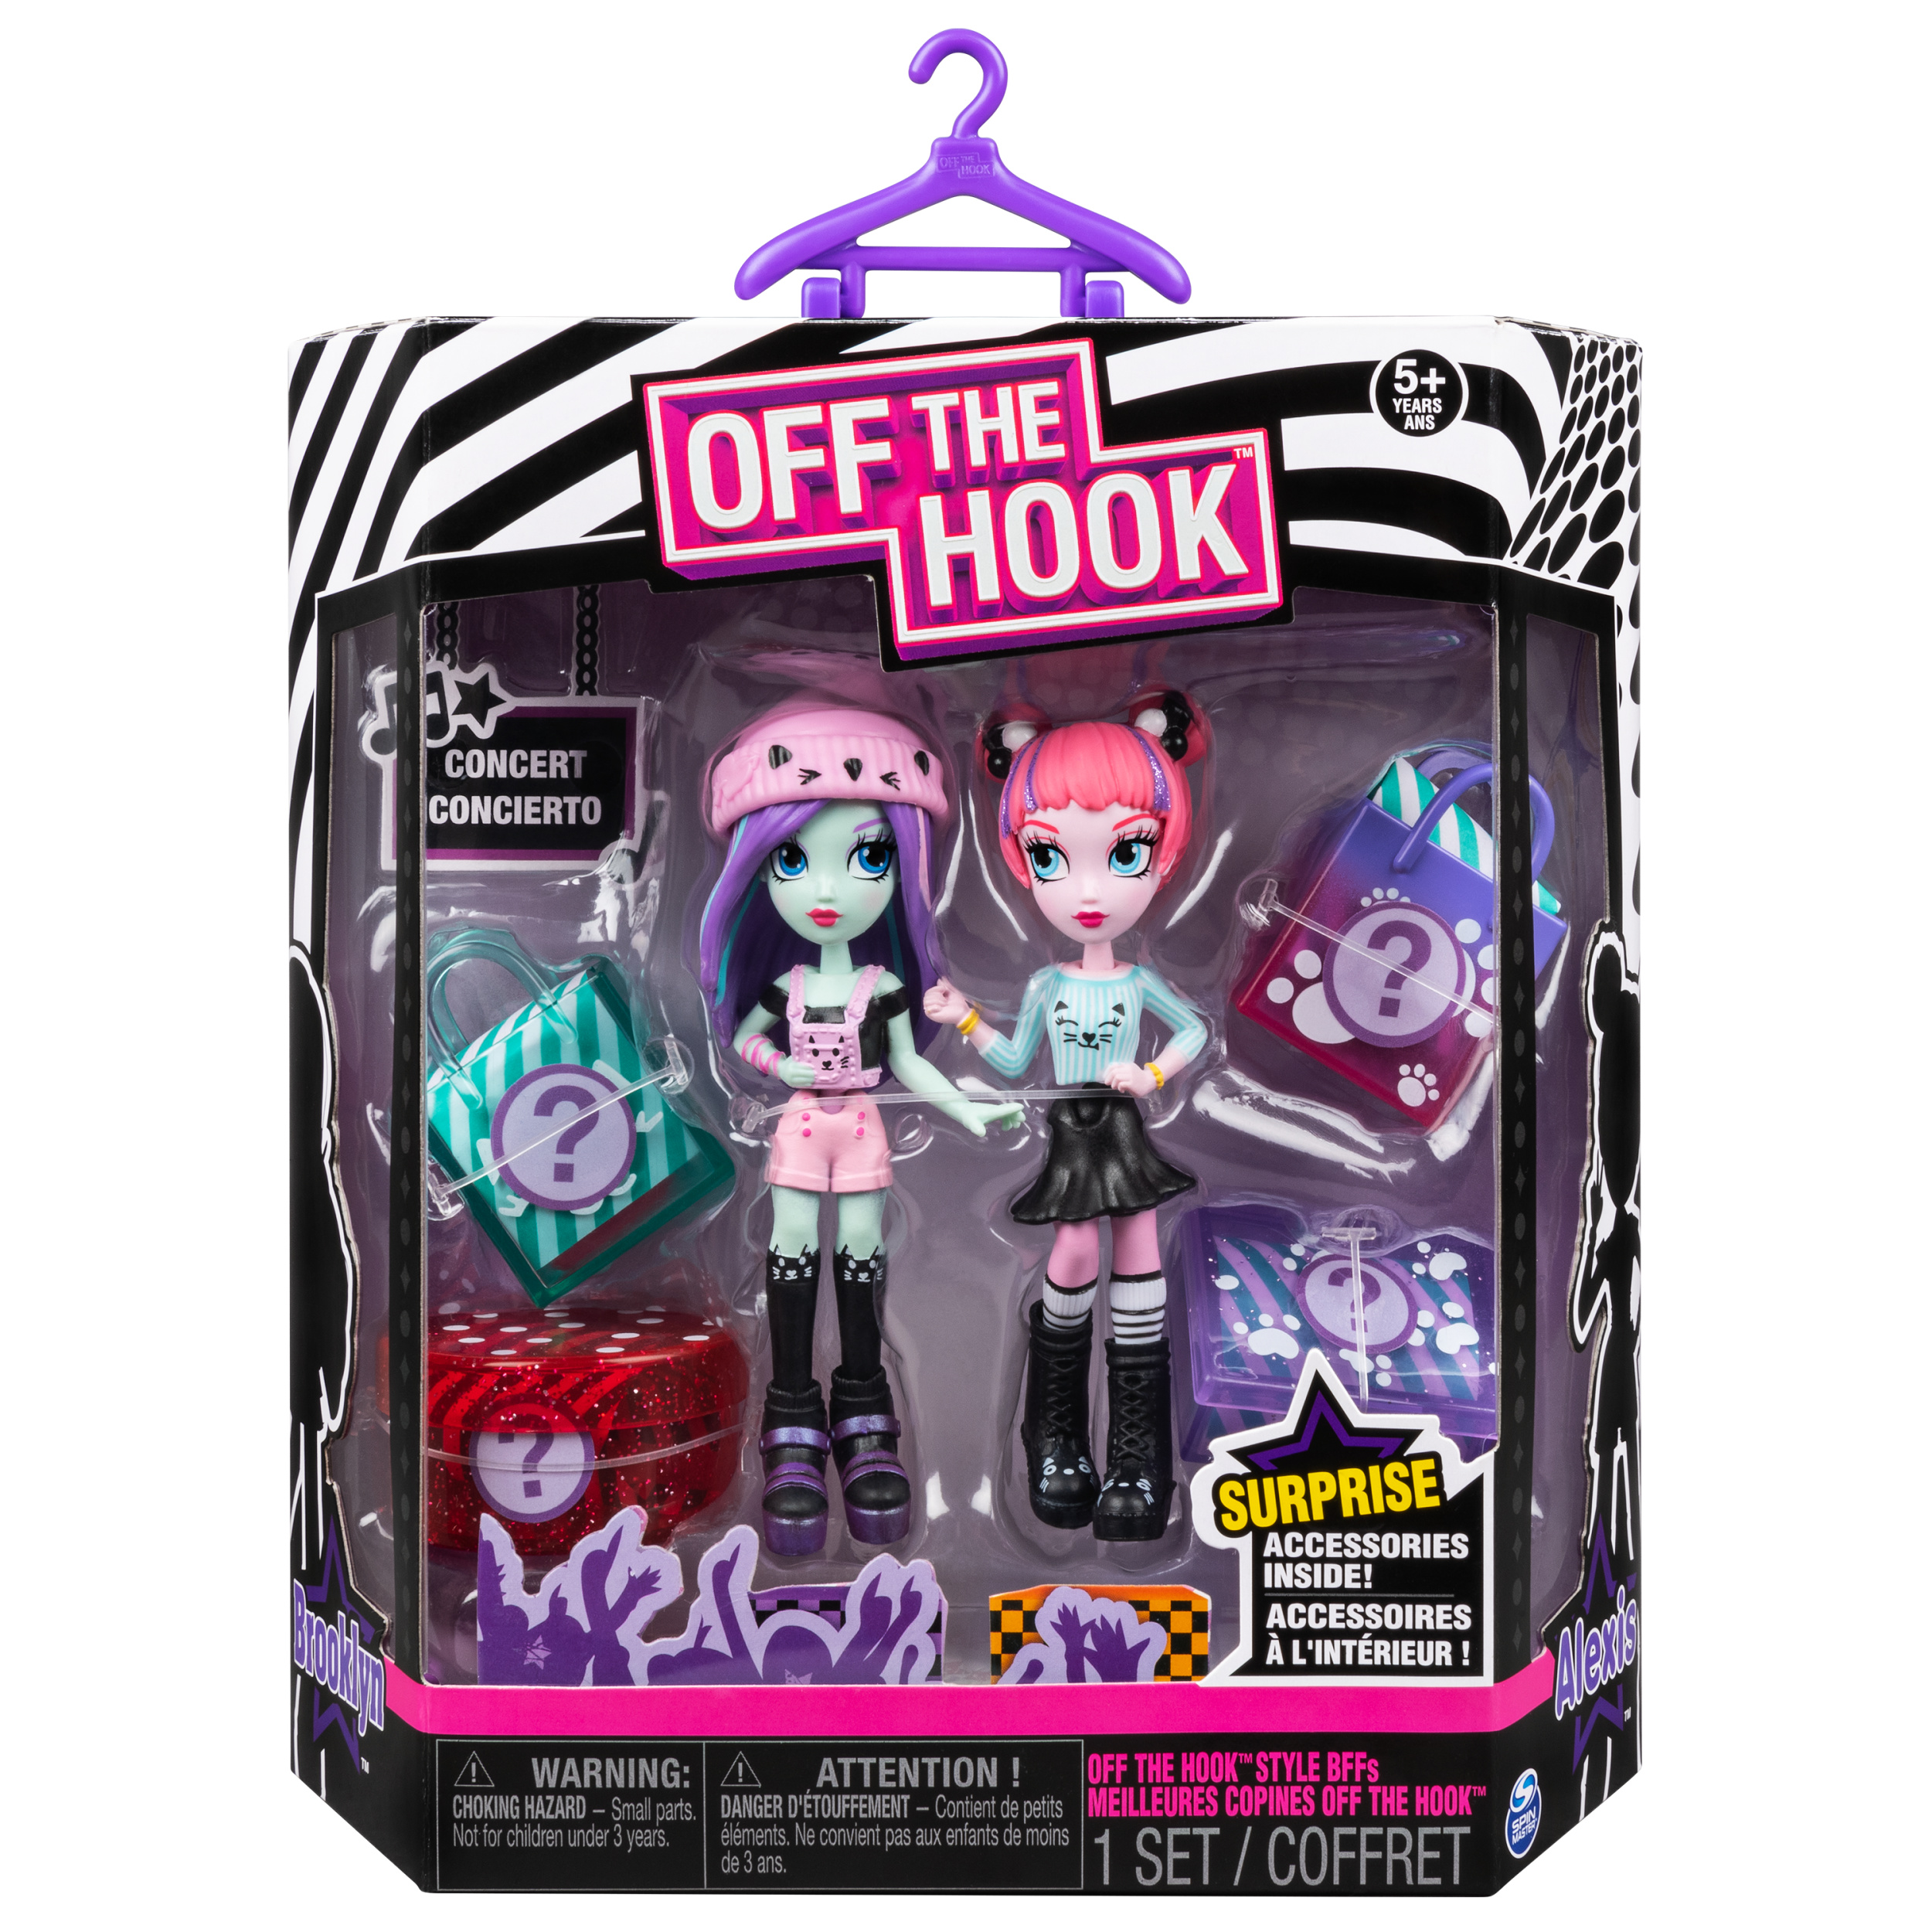 Off The Hook Style BFFs Brooklyn & Alexis Fashion Doll Playset, 6 Pieces Included - image 3 of 8